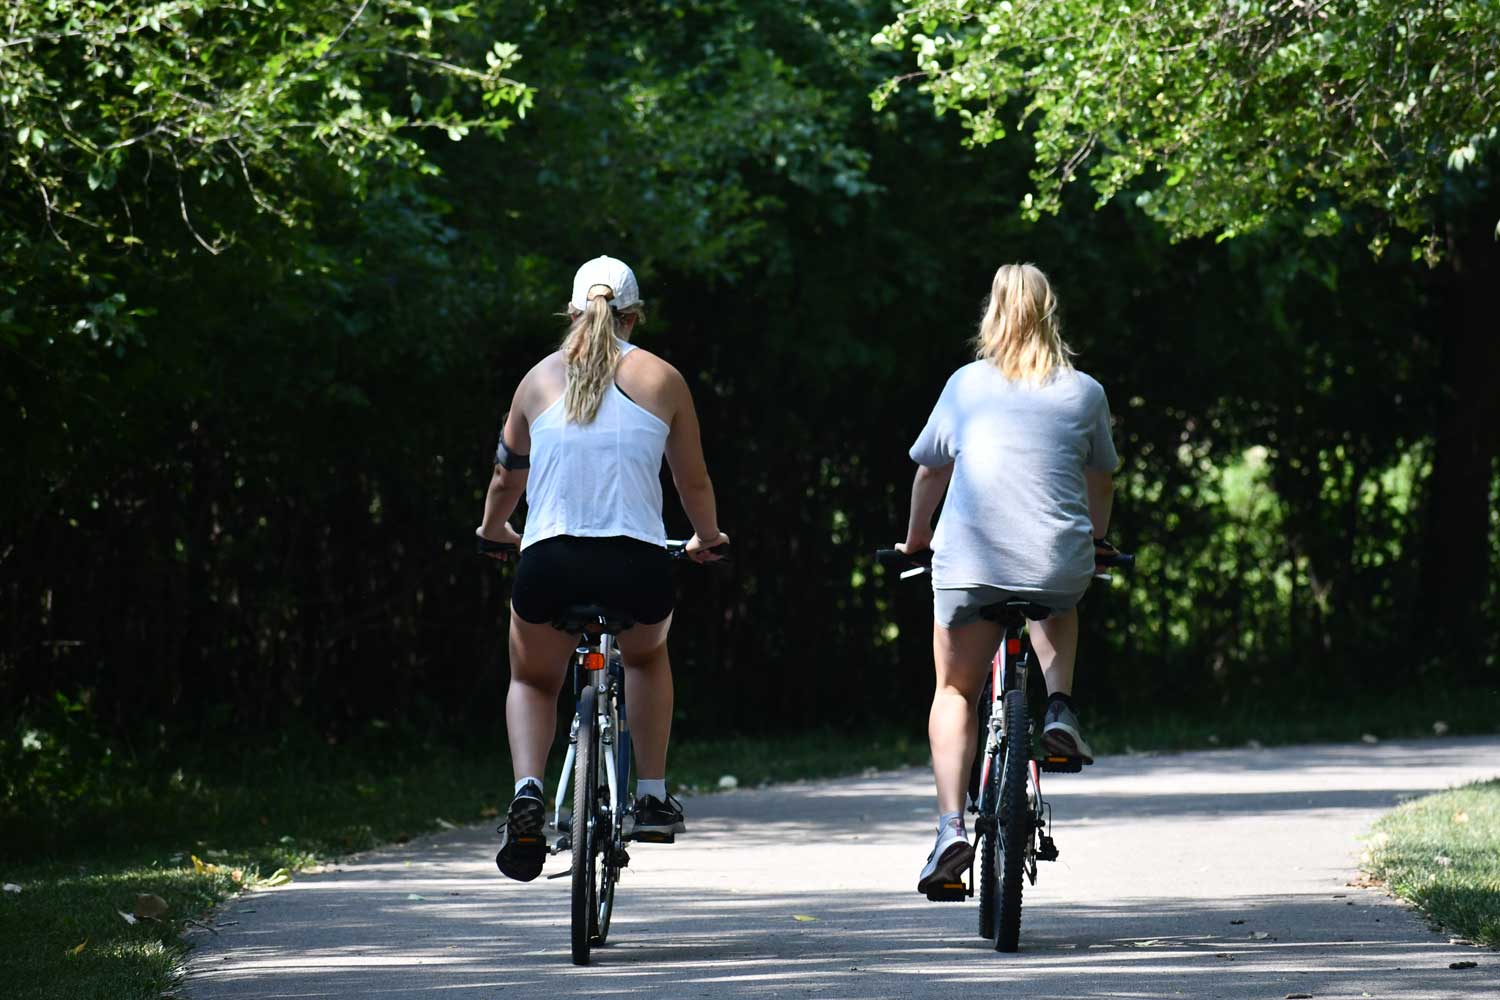 People riding bikes on a paved trail.